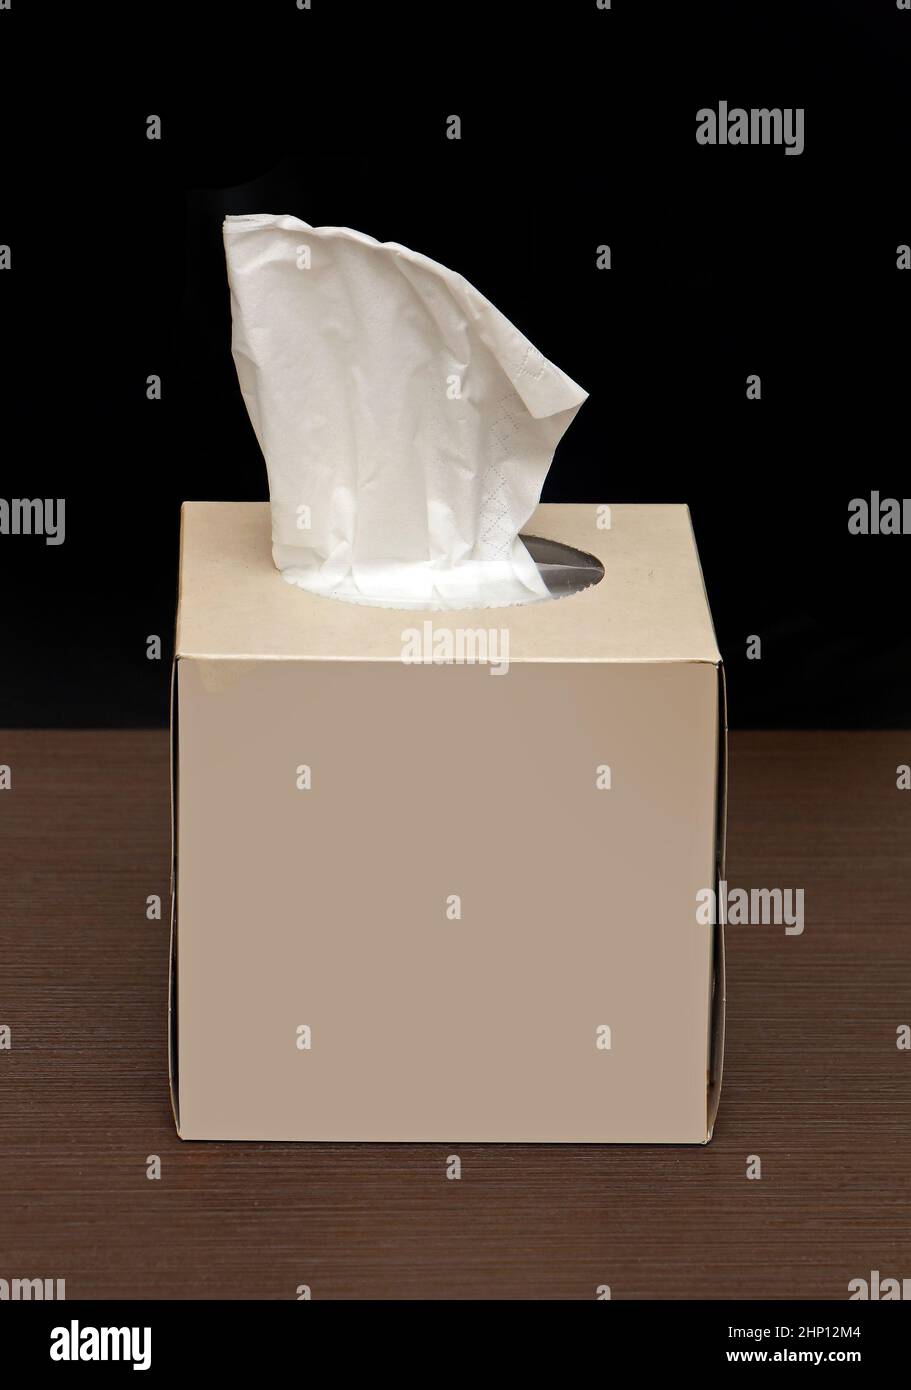 Box of paper tissues on shelf with one sticking from the top Stock Photo